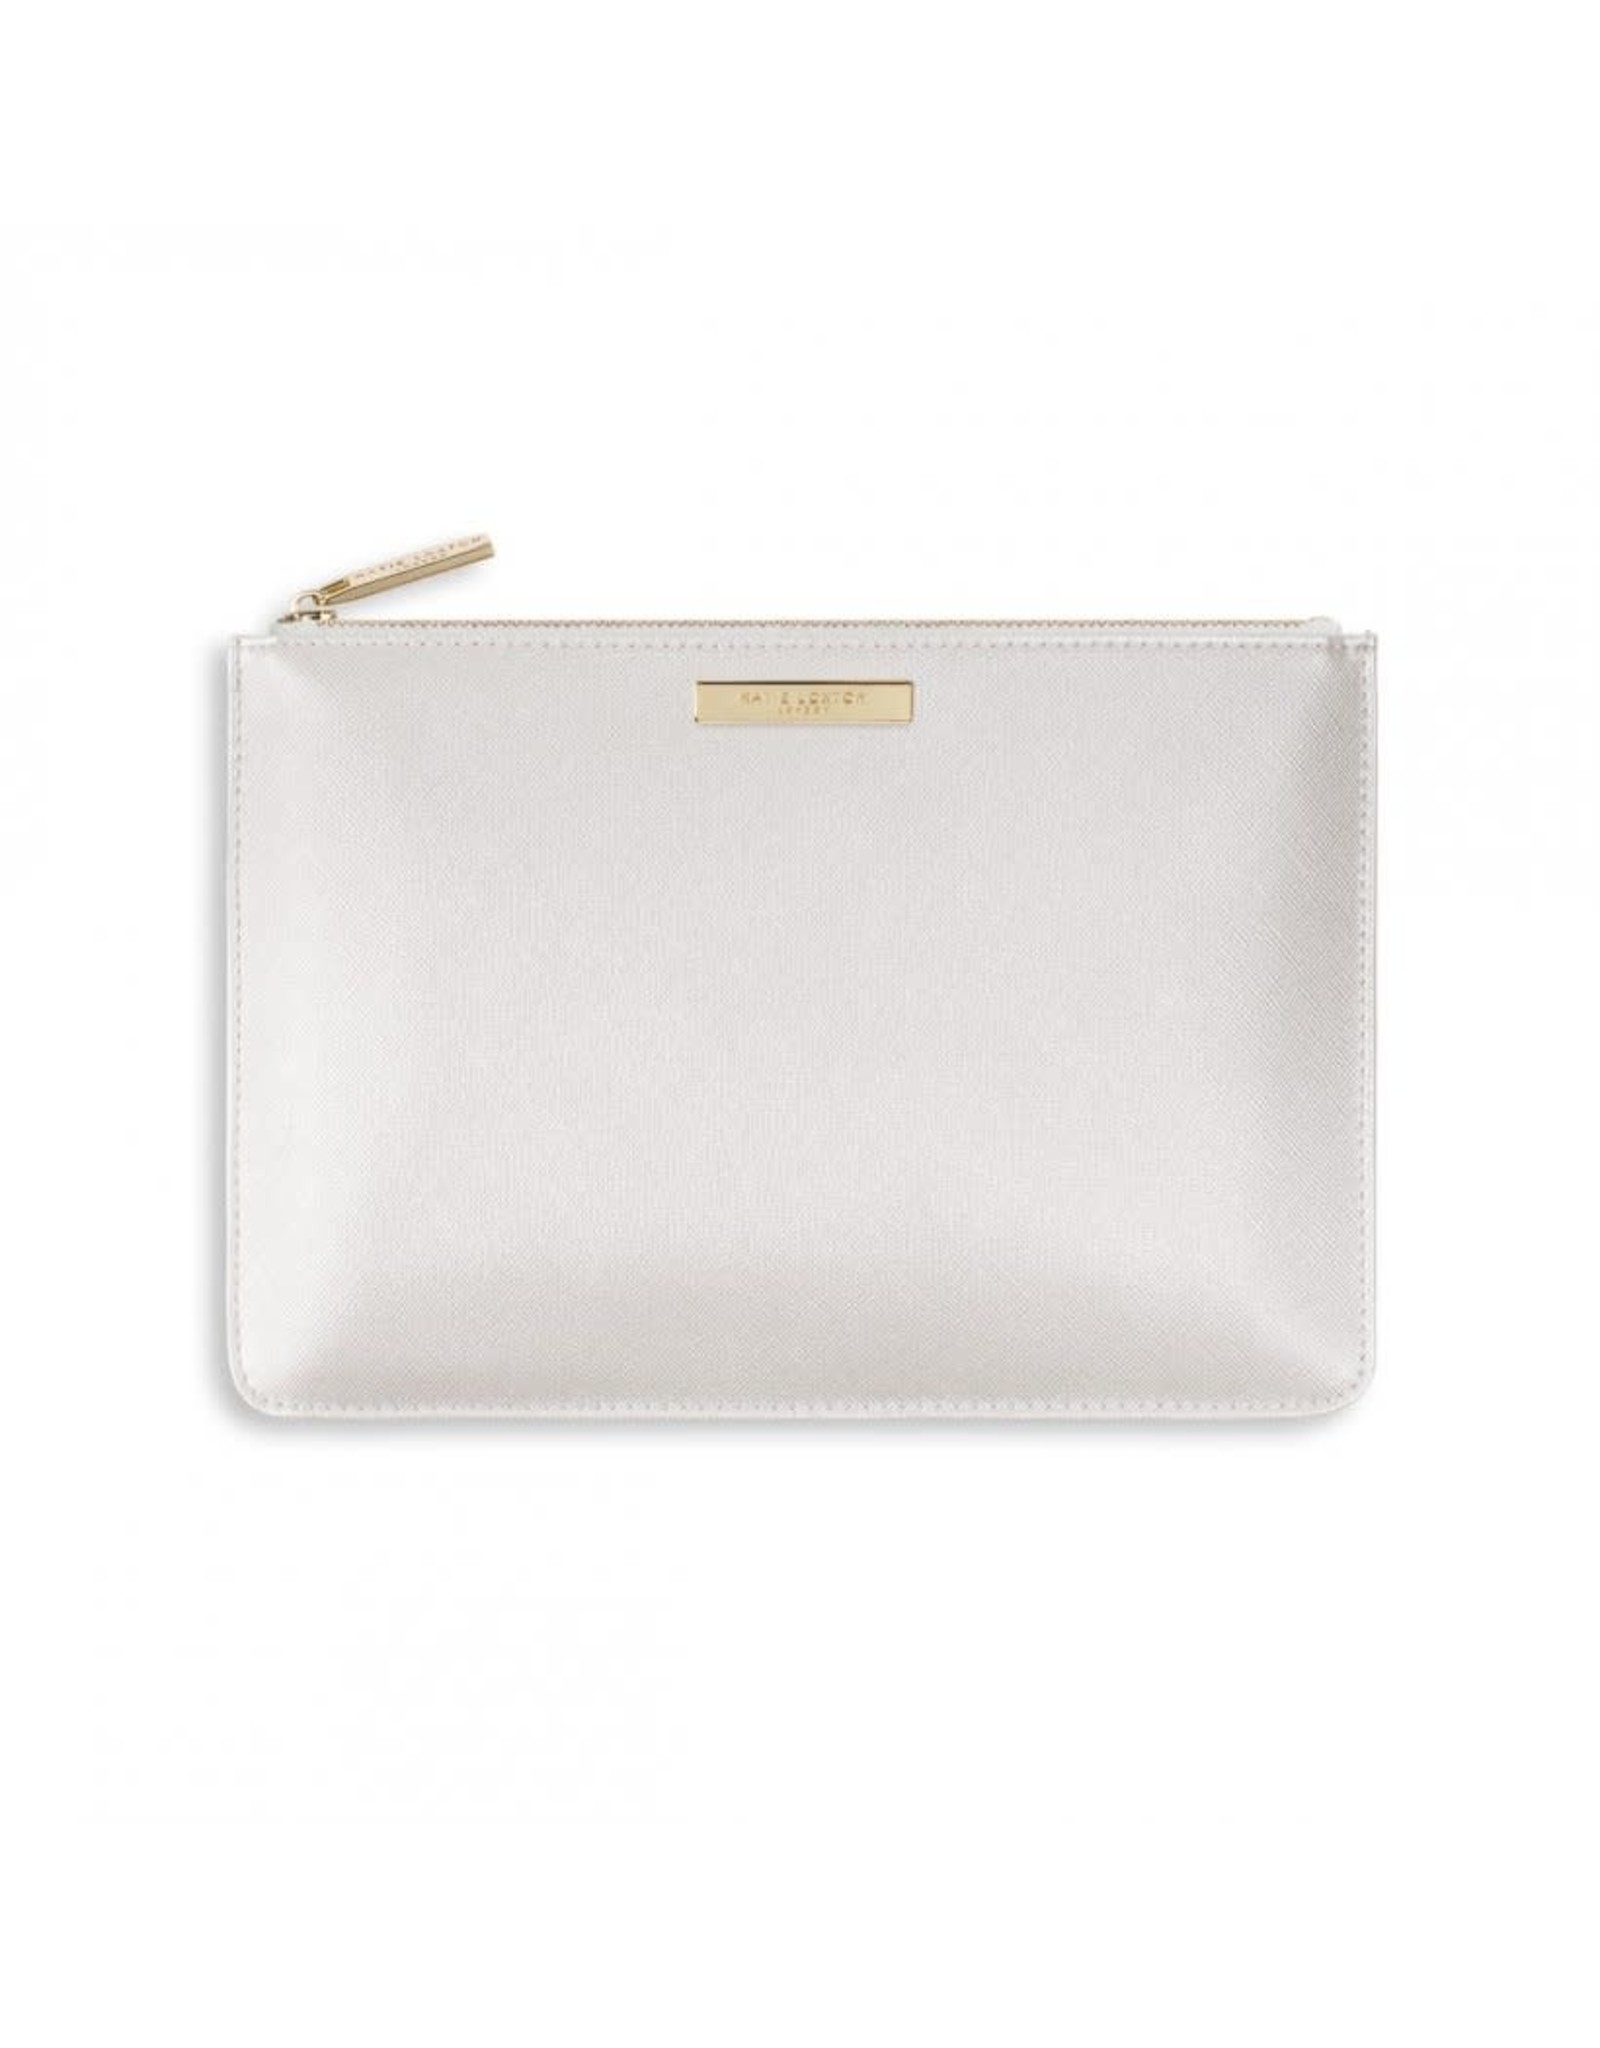 KATIE LOXTON PERF POUCH BRIDAL MAID OF HONOR